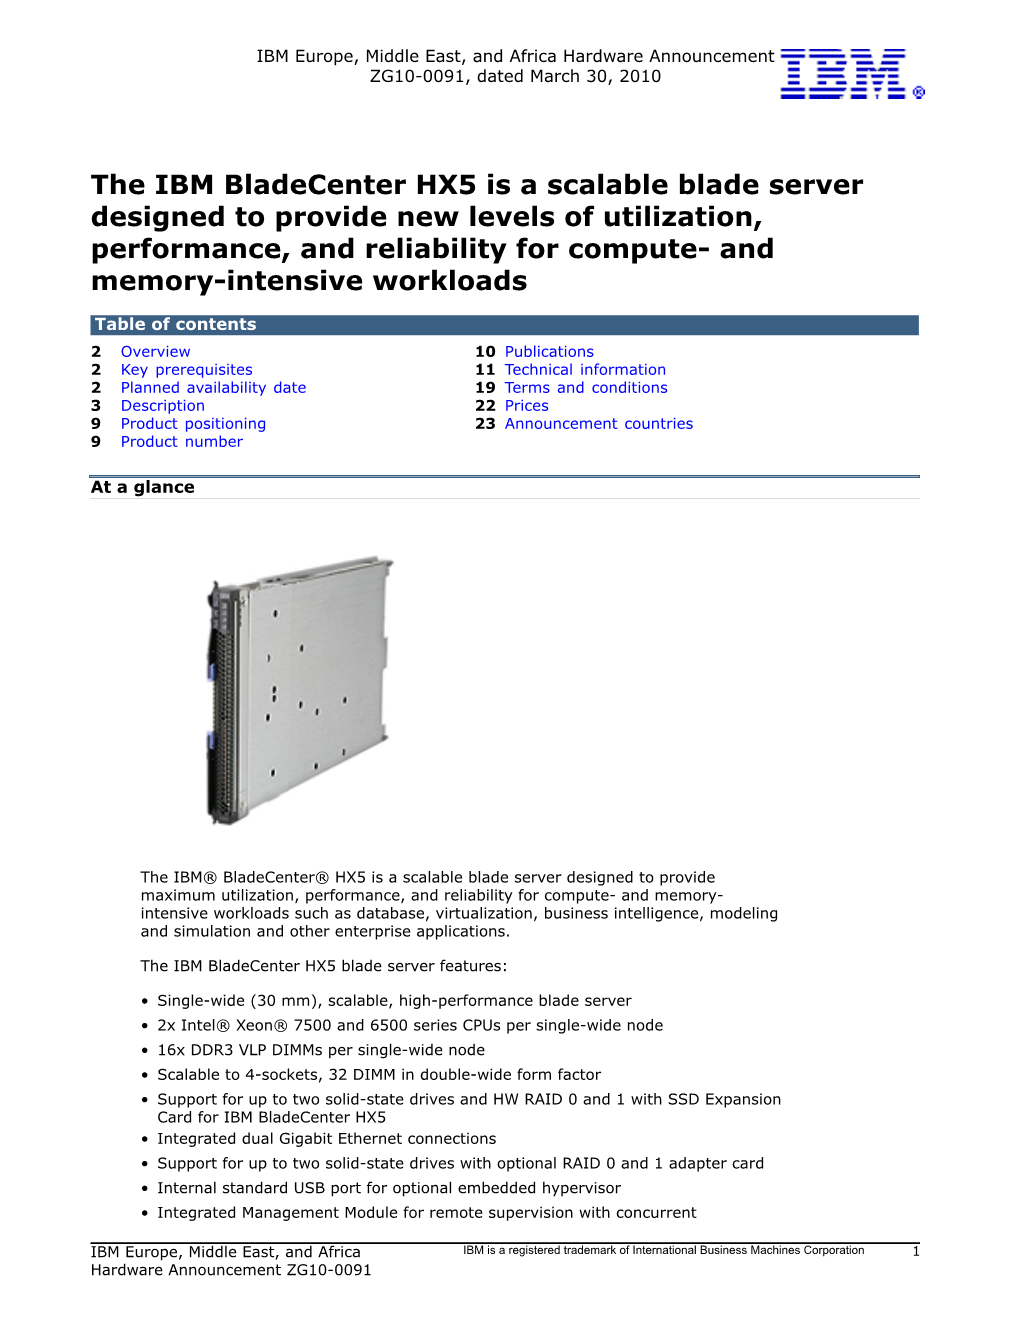 The IBM Bladecenter HX5 Is a Scalable Blade Server Designed to Provide New Levels of Utilization, Performance, and Reliability F